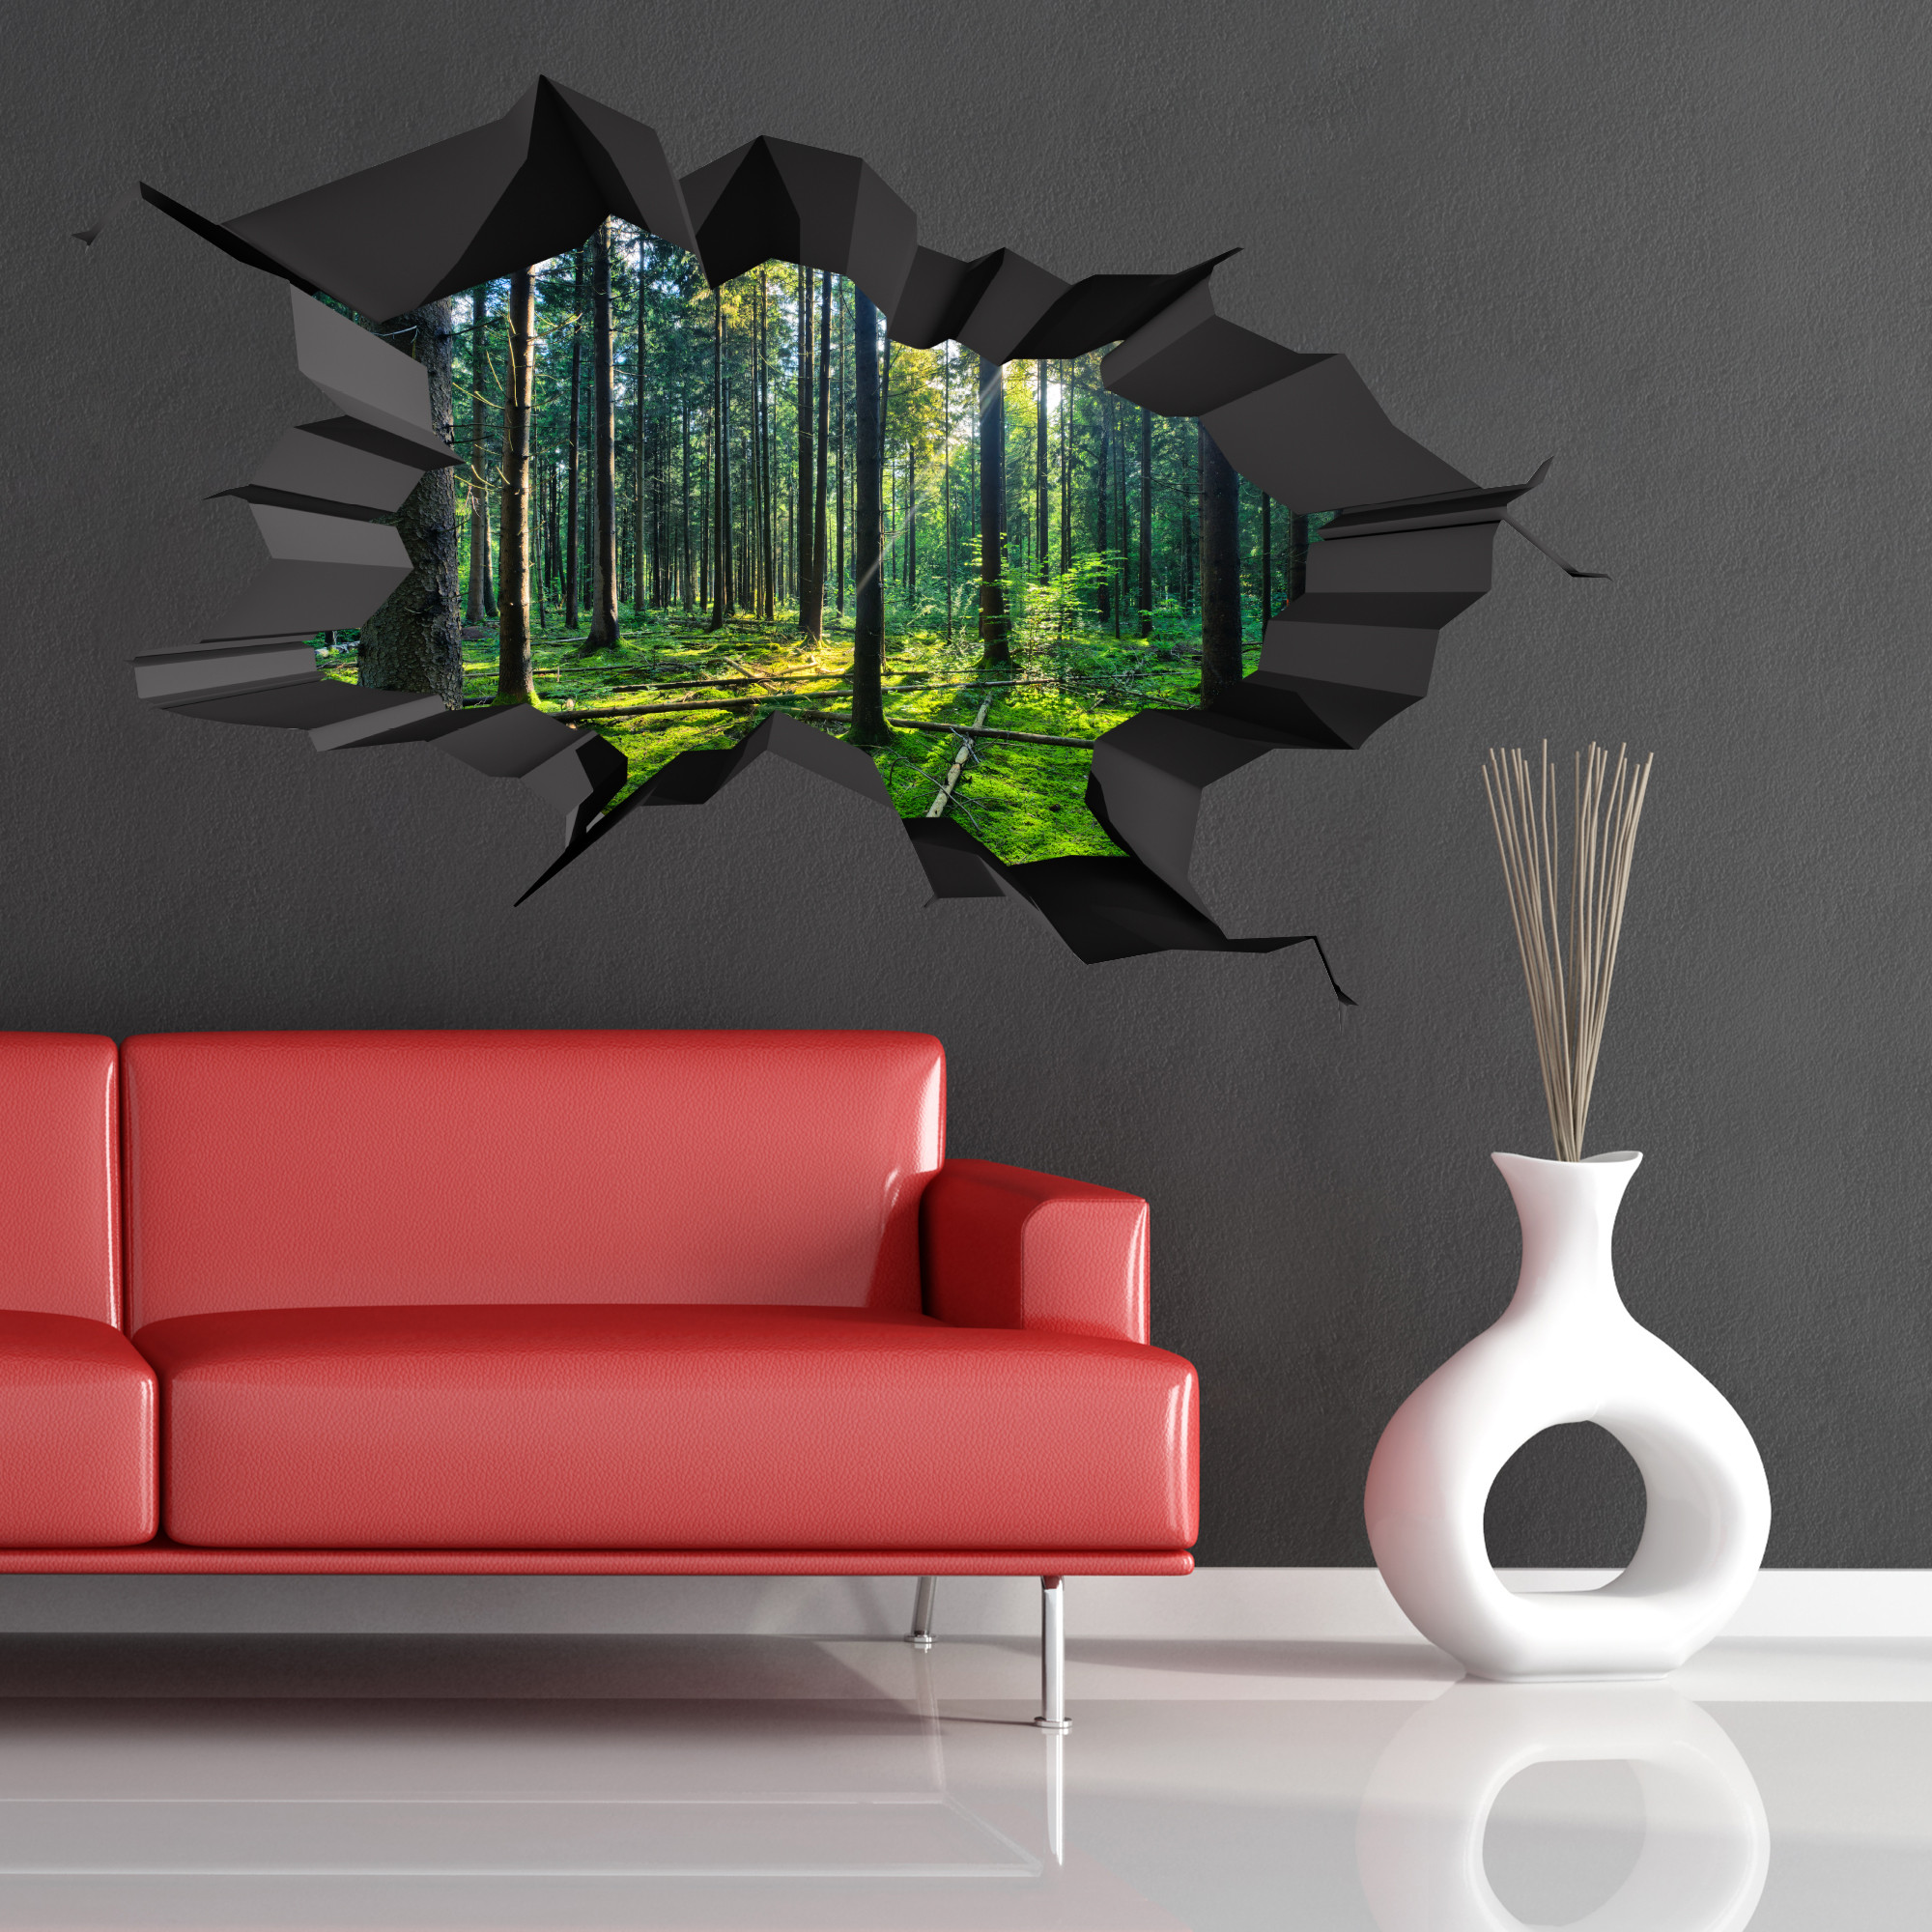 The Best Ideas for 3d Wall Art - Best Collections Ever | Home Decor